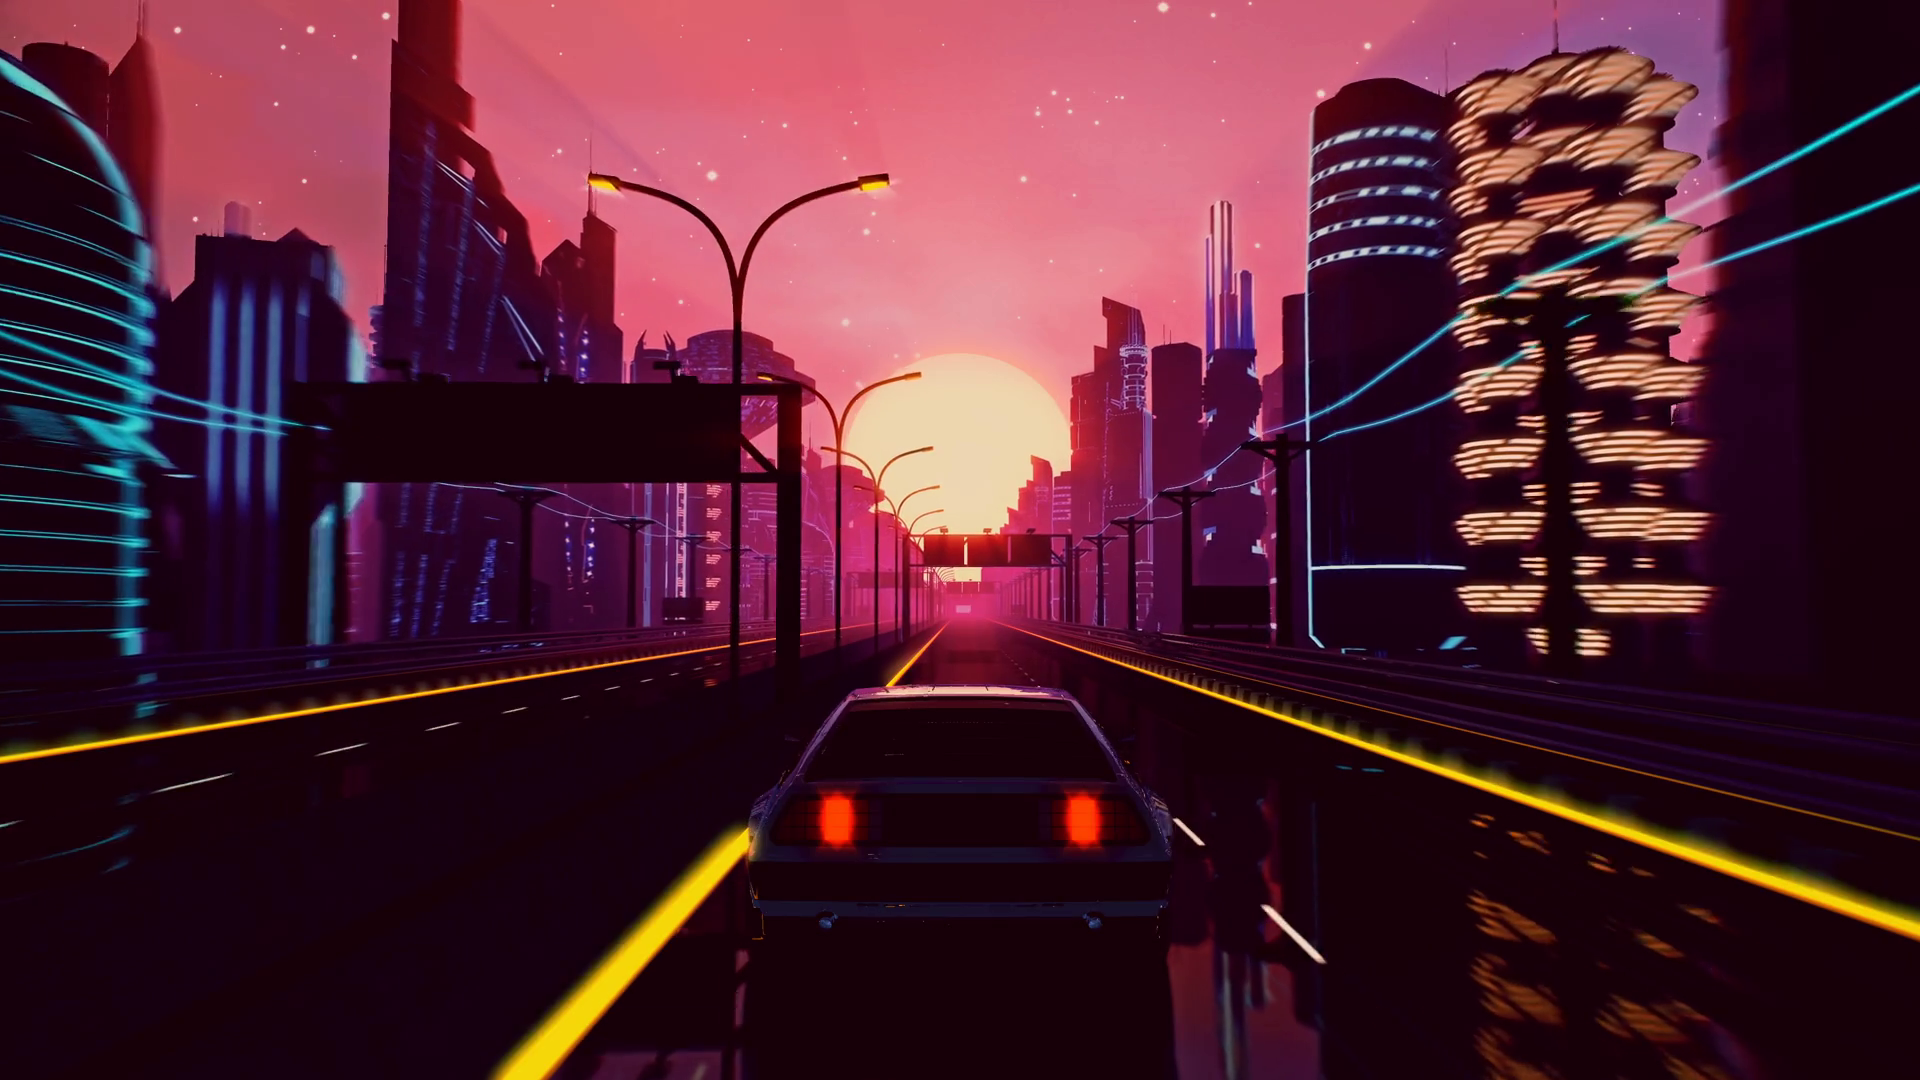 Retro Futuristic 80s Style Drive In Neon City. Seamless Loop Of Cyberpunk Sunset Landscape With A Moving Car On A Highway Road. VJ Synthwave Looping 3D Animation For Music Video. 4K Stylized Vintage